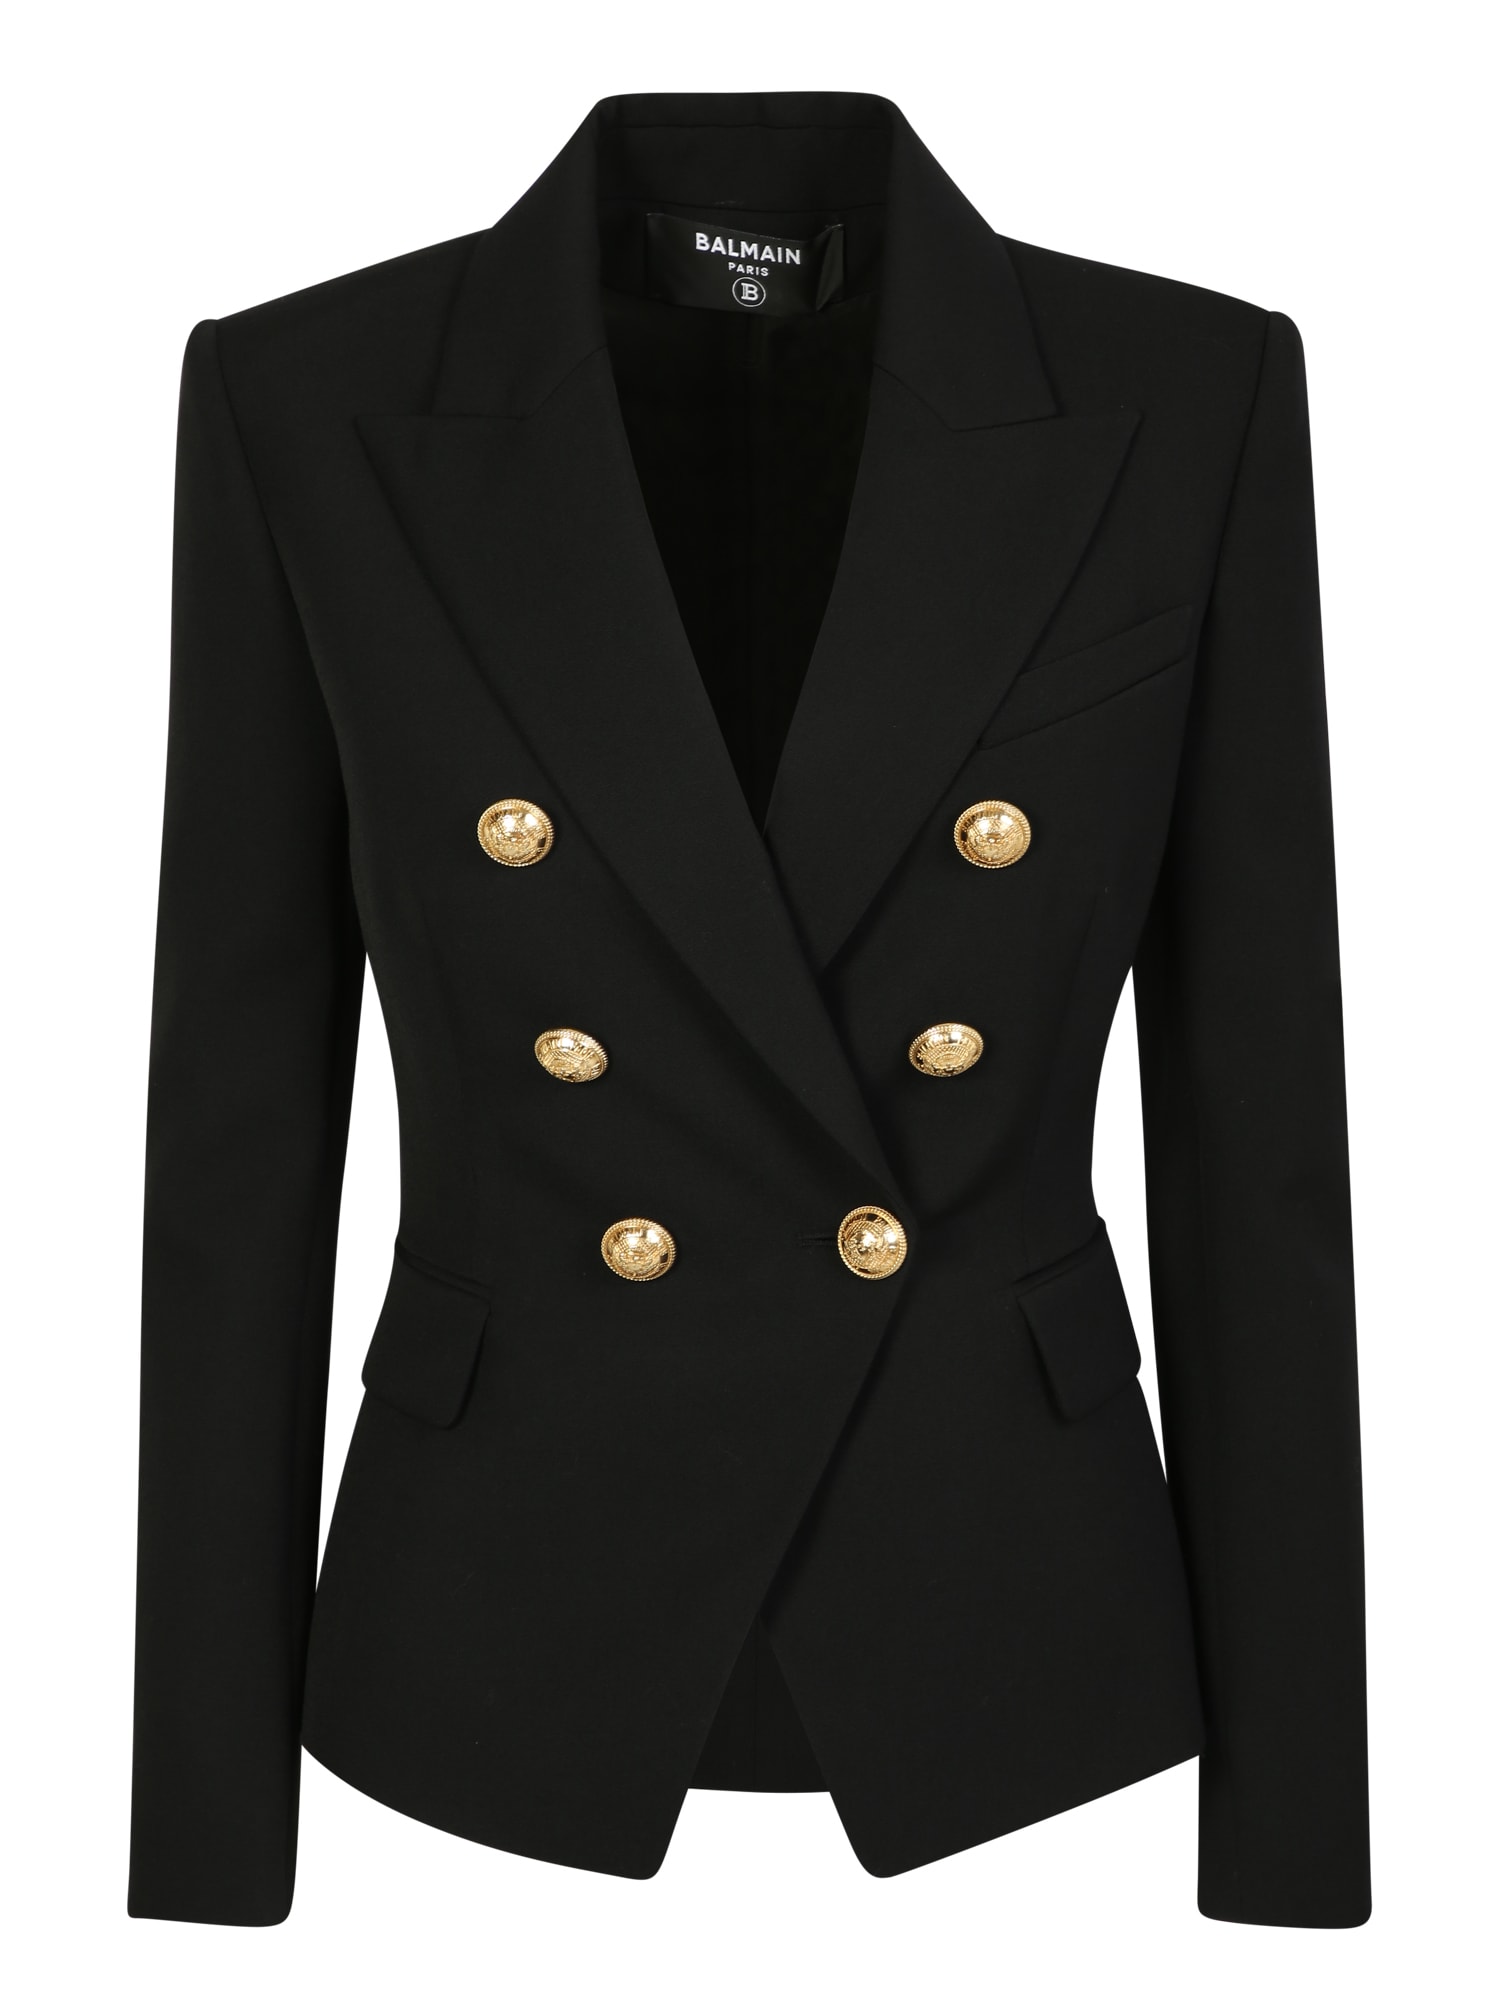 Balmain Garments Are A Guarantee For Attention To Detail Like This Double-breasted Blazer With A Tailored Design